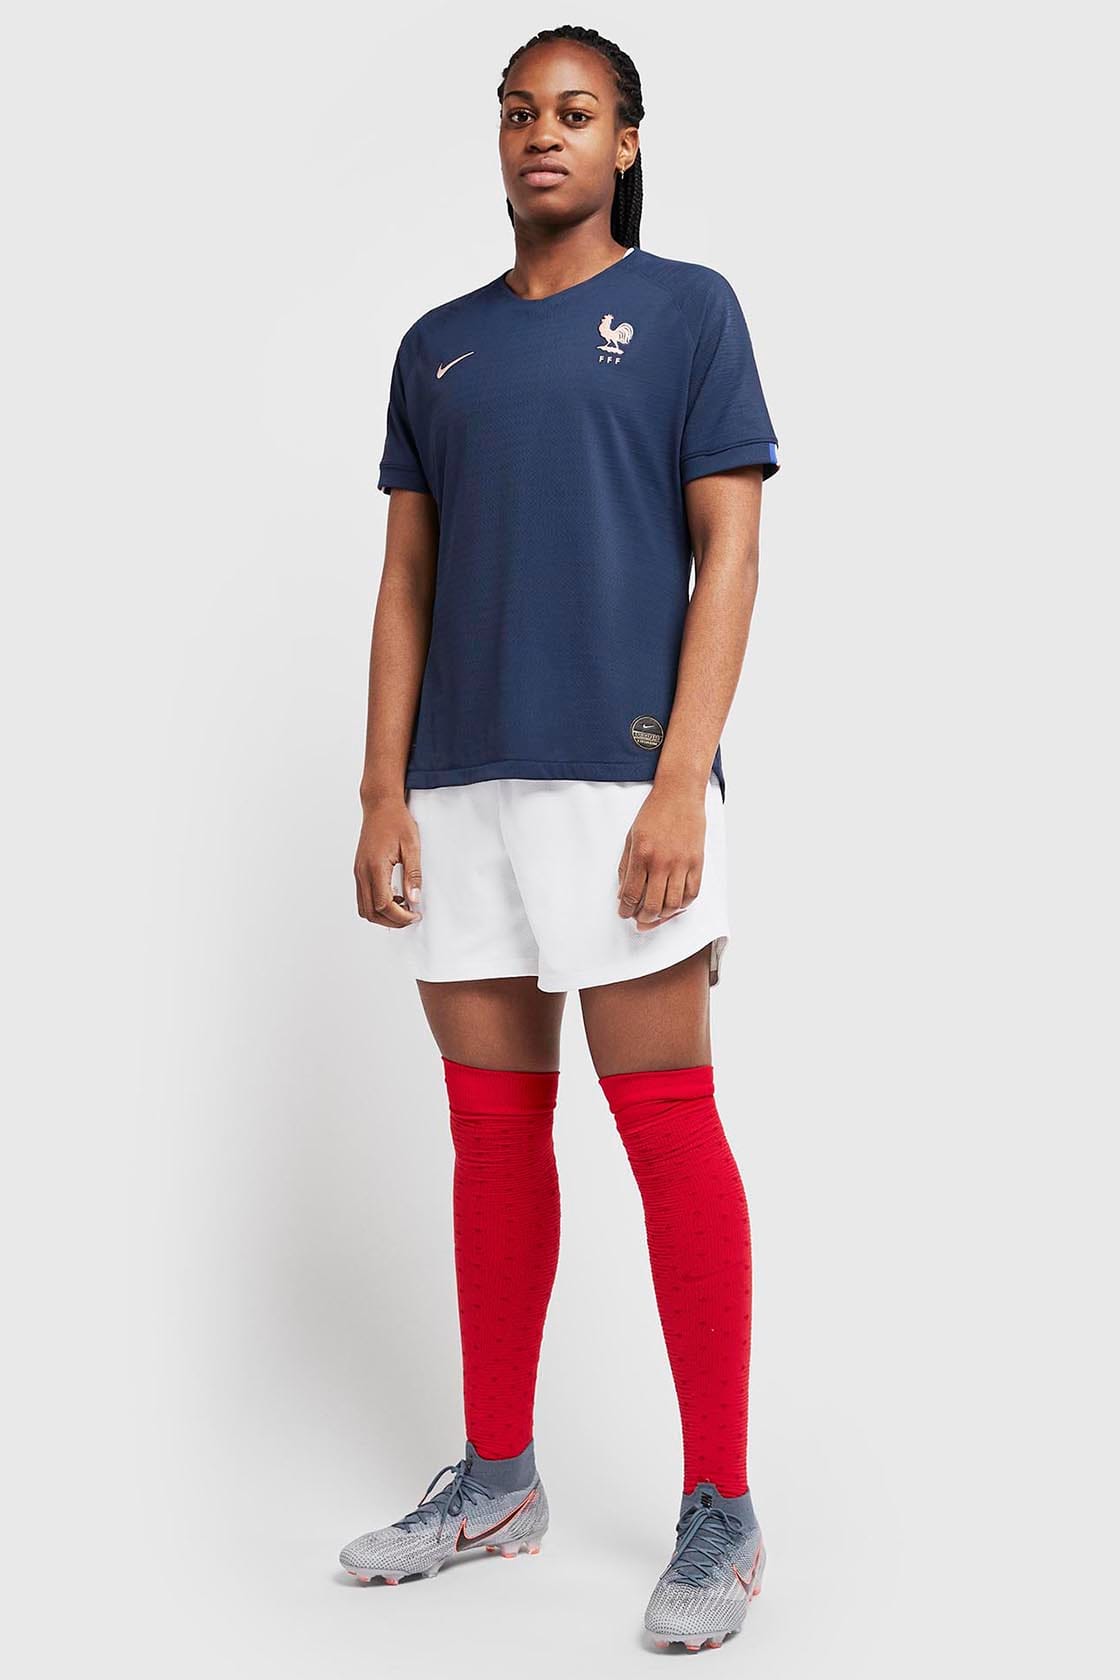 france women's world cup jersey 2019